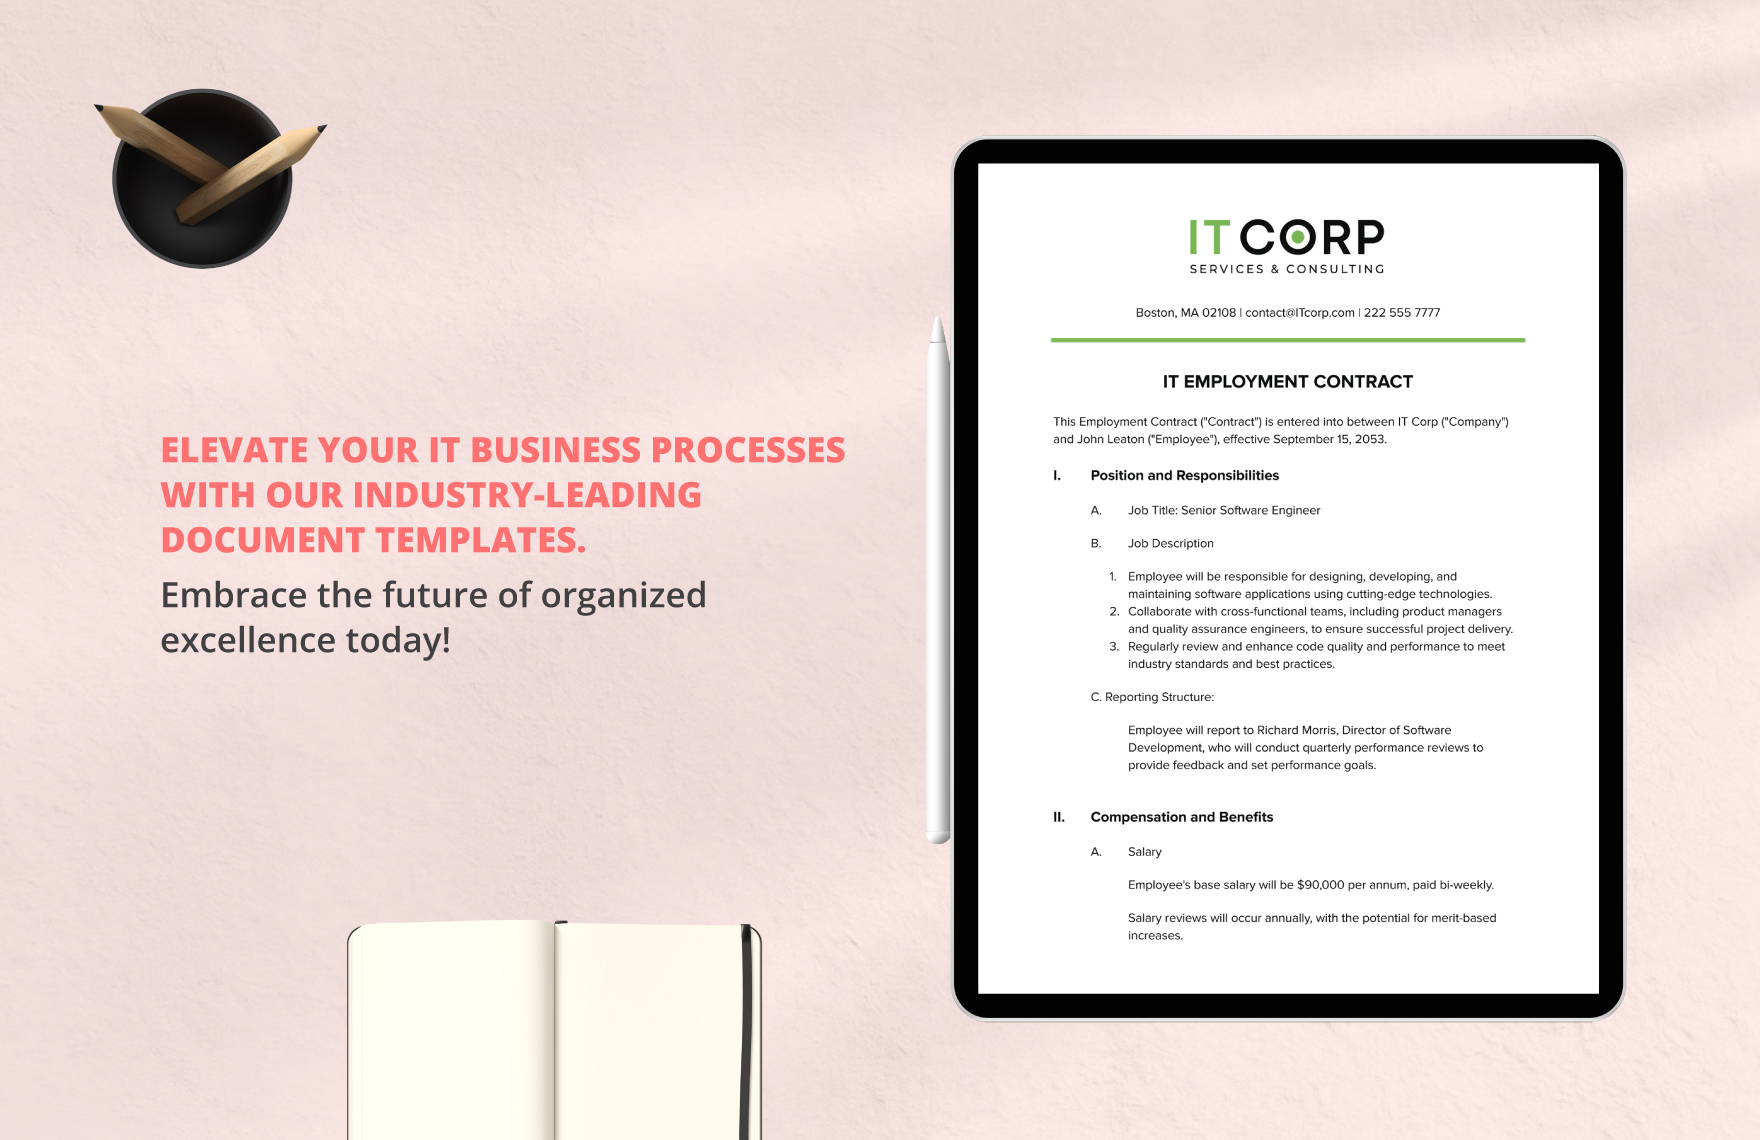 IT Employment Contract Template